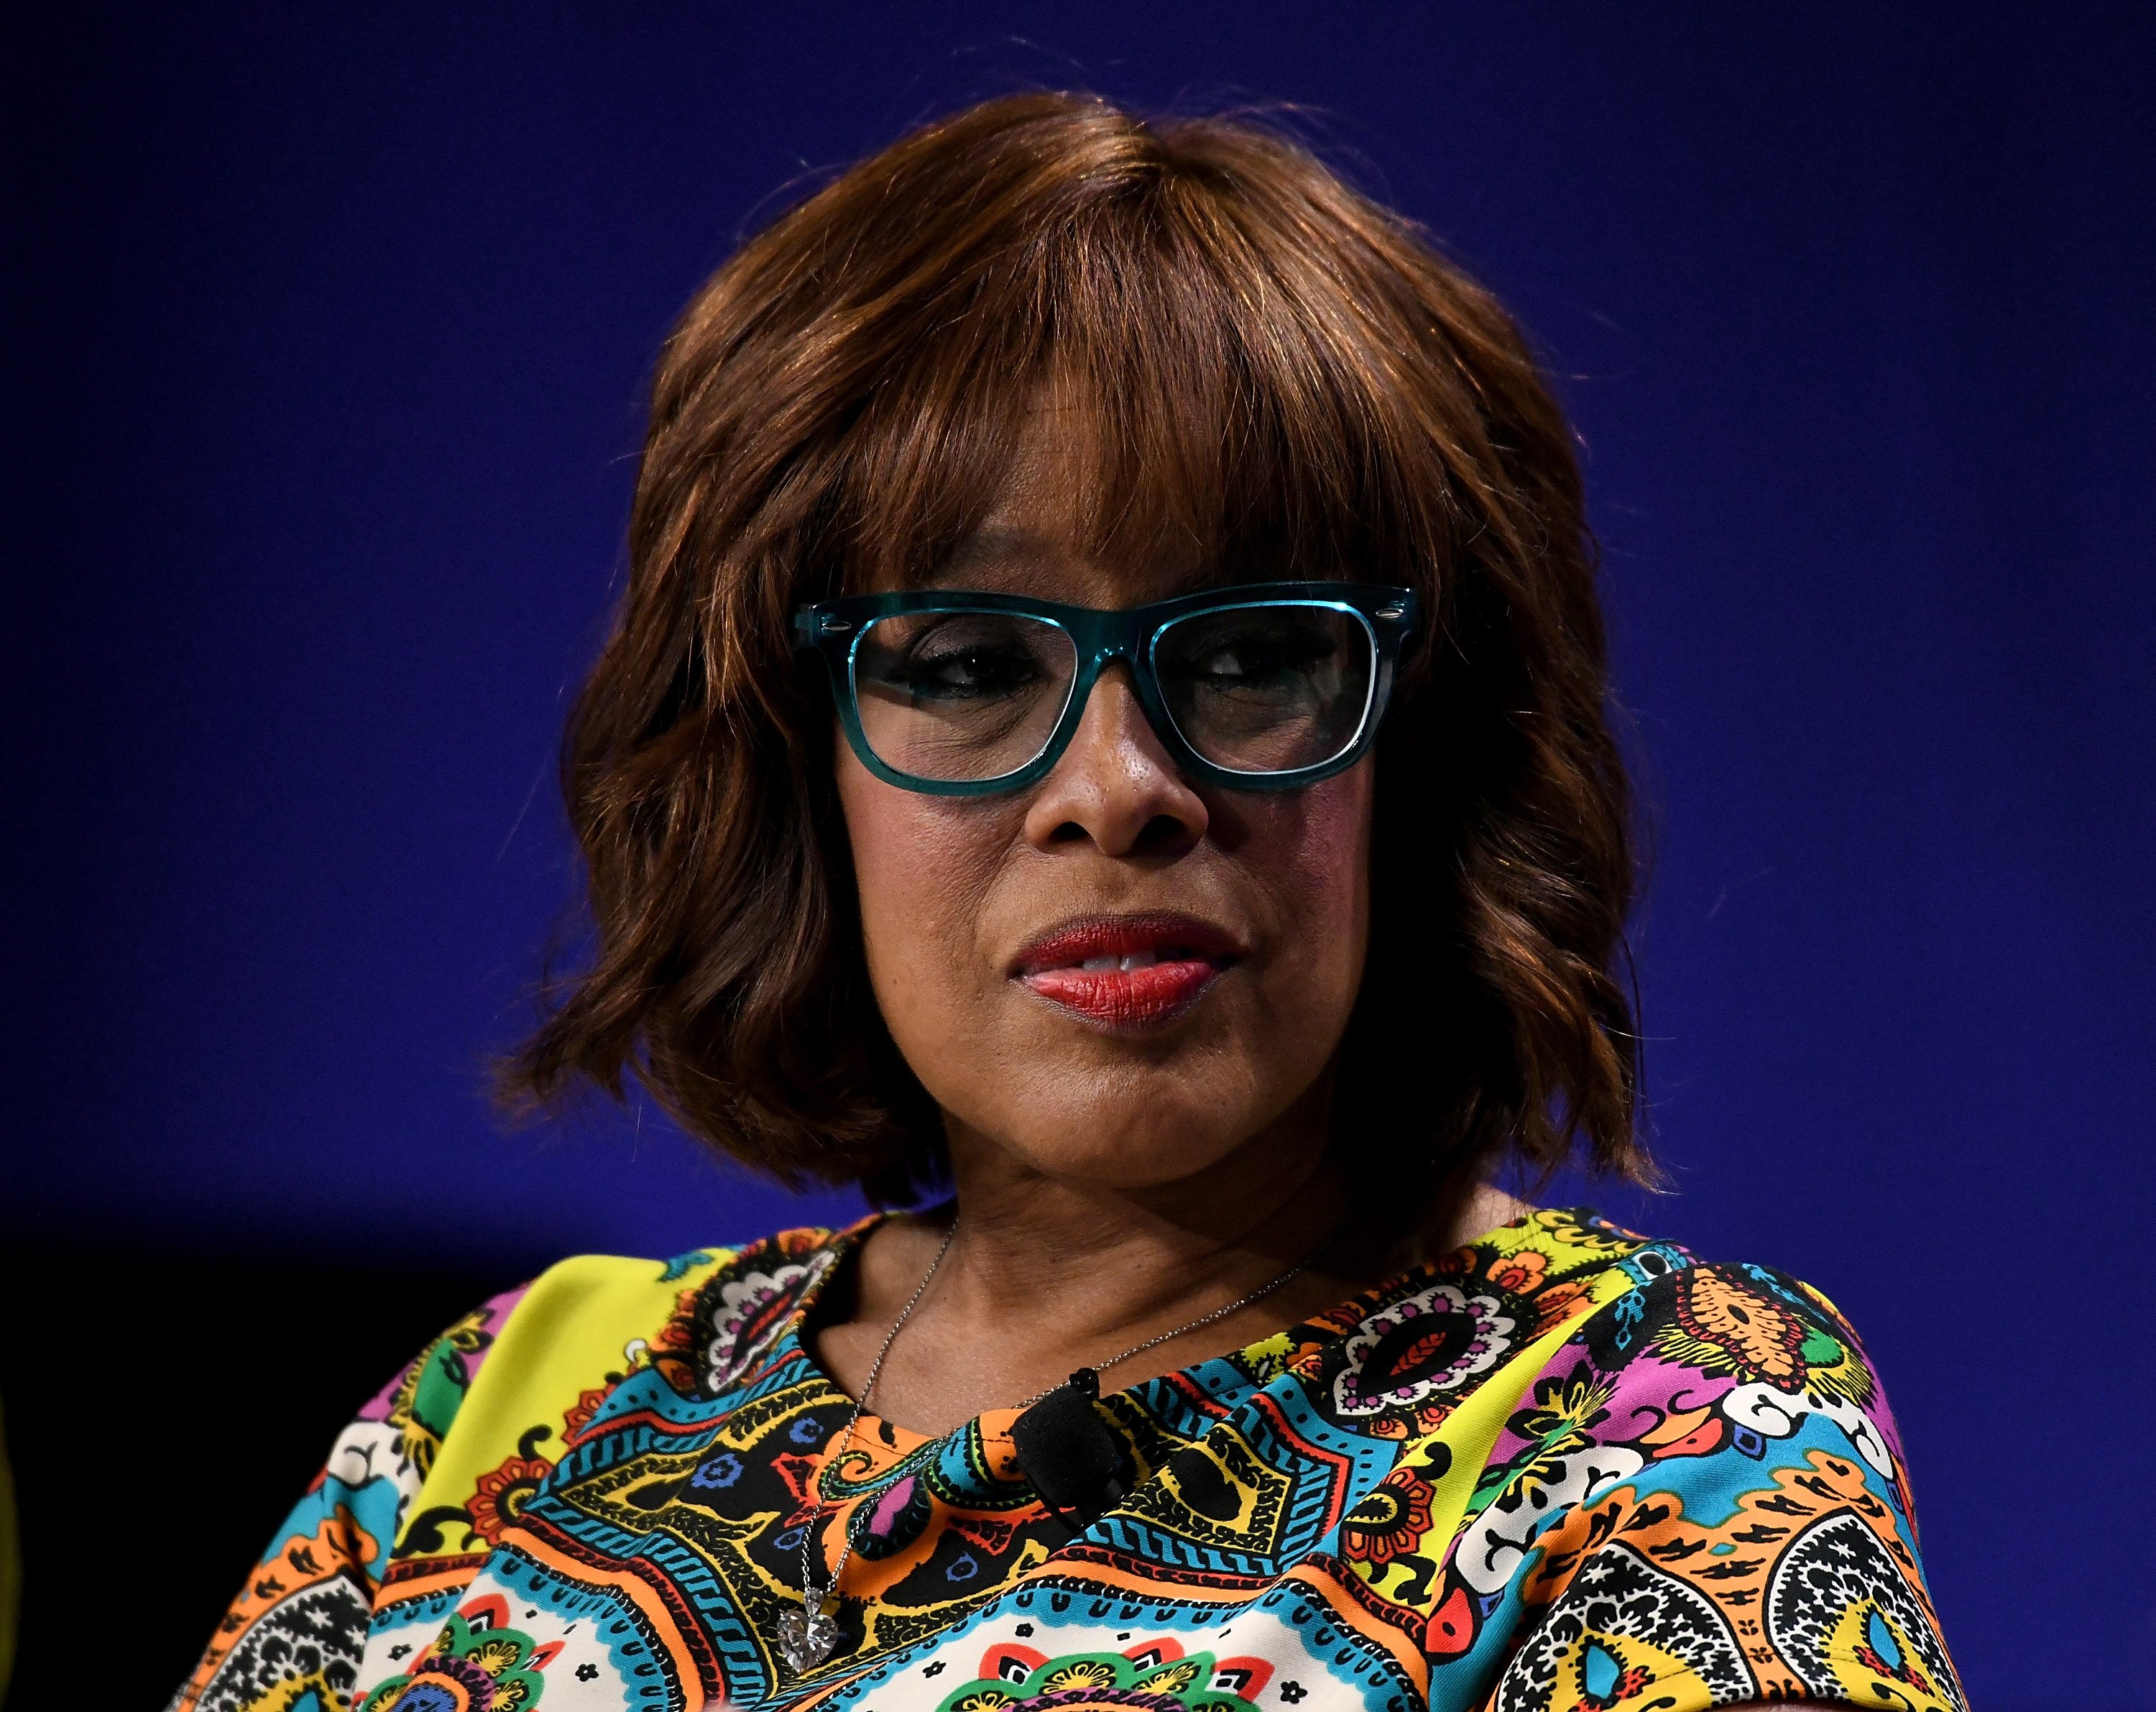 Gayle King participates in a panel discussion during the annual Milken Institute Global Conference at The Beverly Hilton Hotel on April 29, 2019 in Beverly Hills, California | Photo: Getty Images